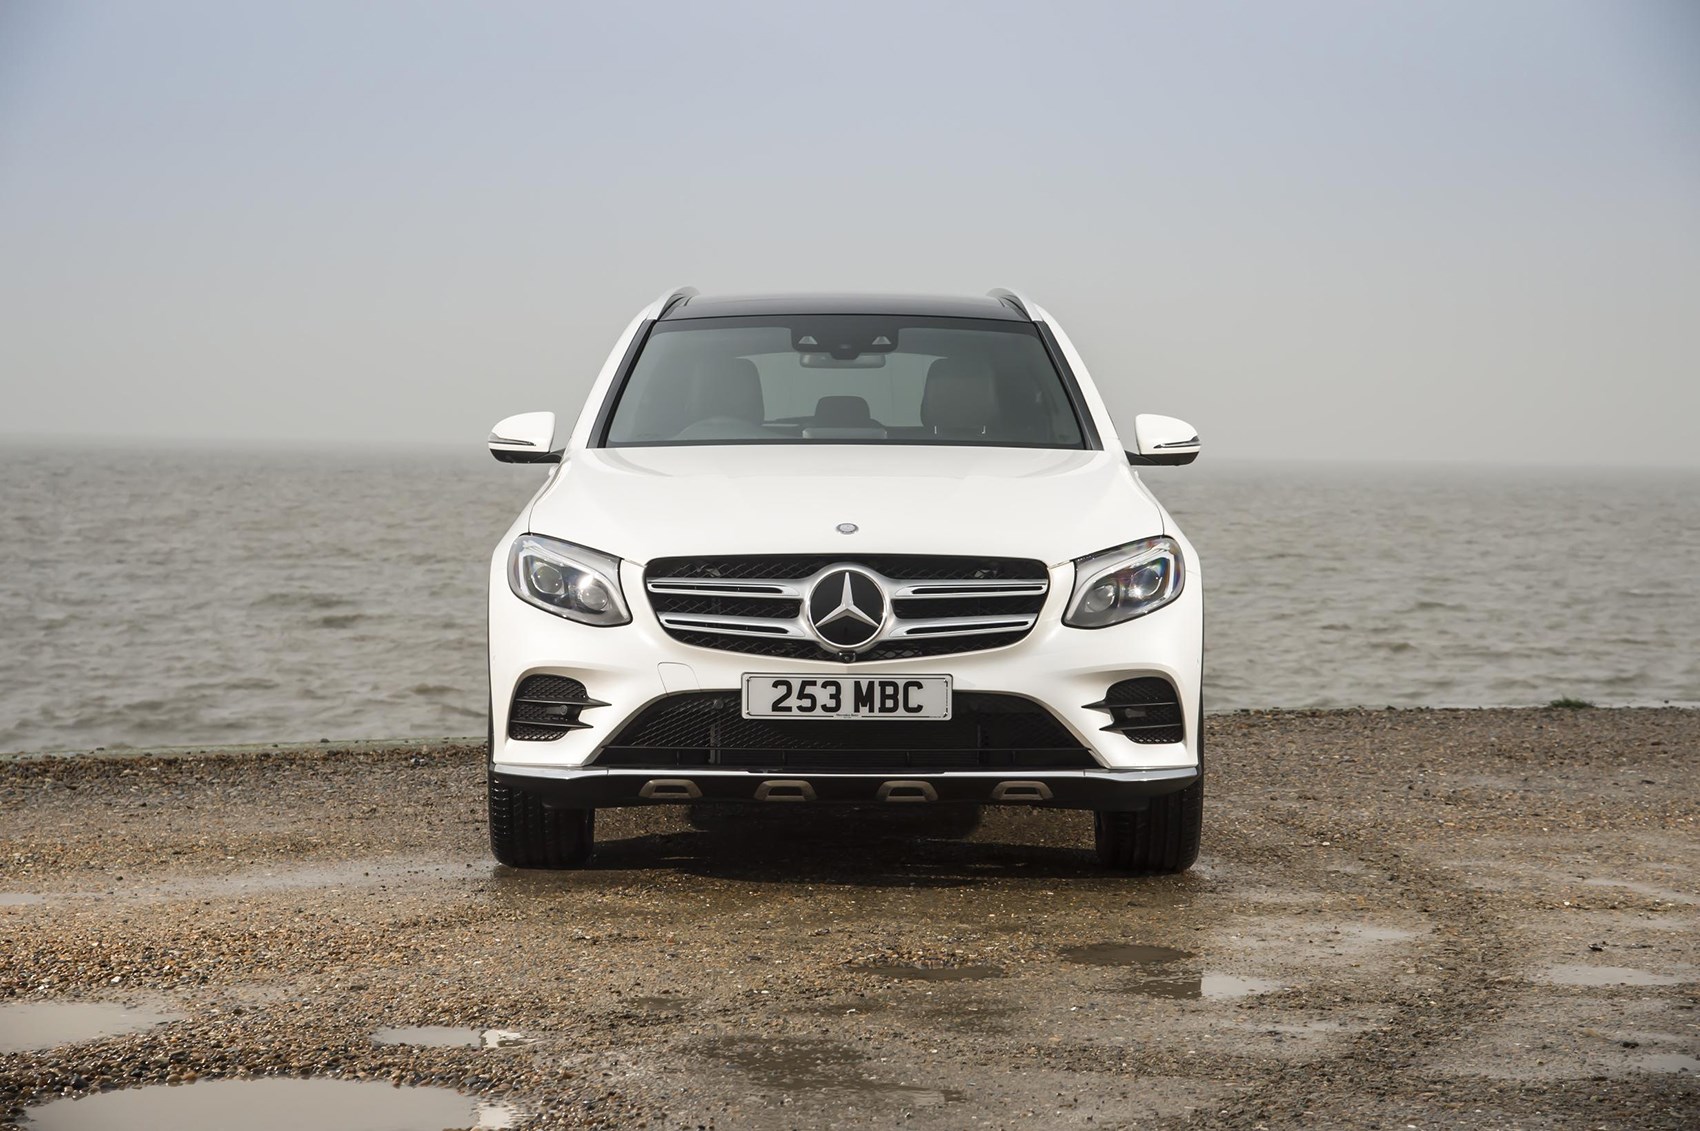 Mercedes GLC 350d: specs, photos and more in CAR's review